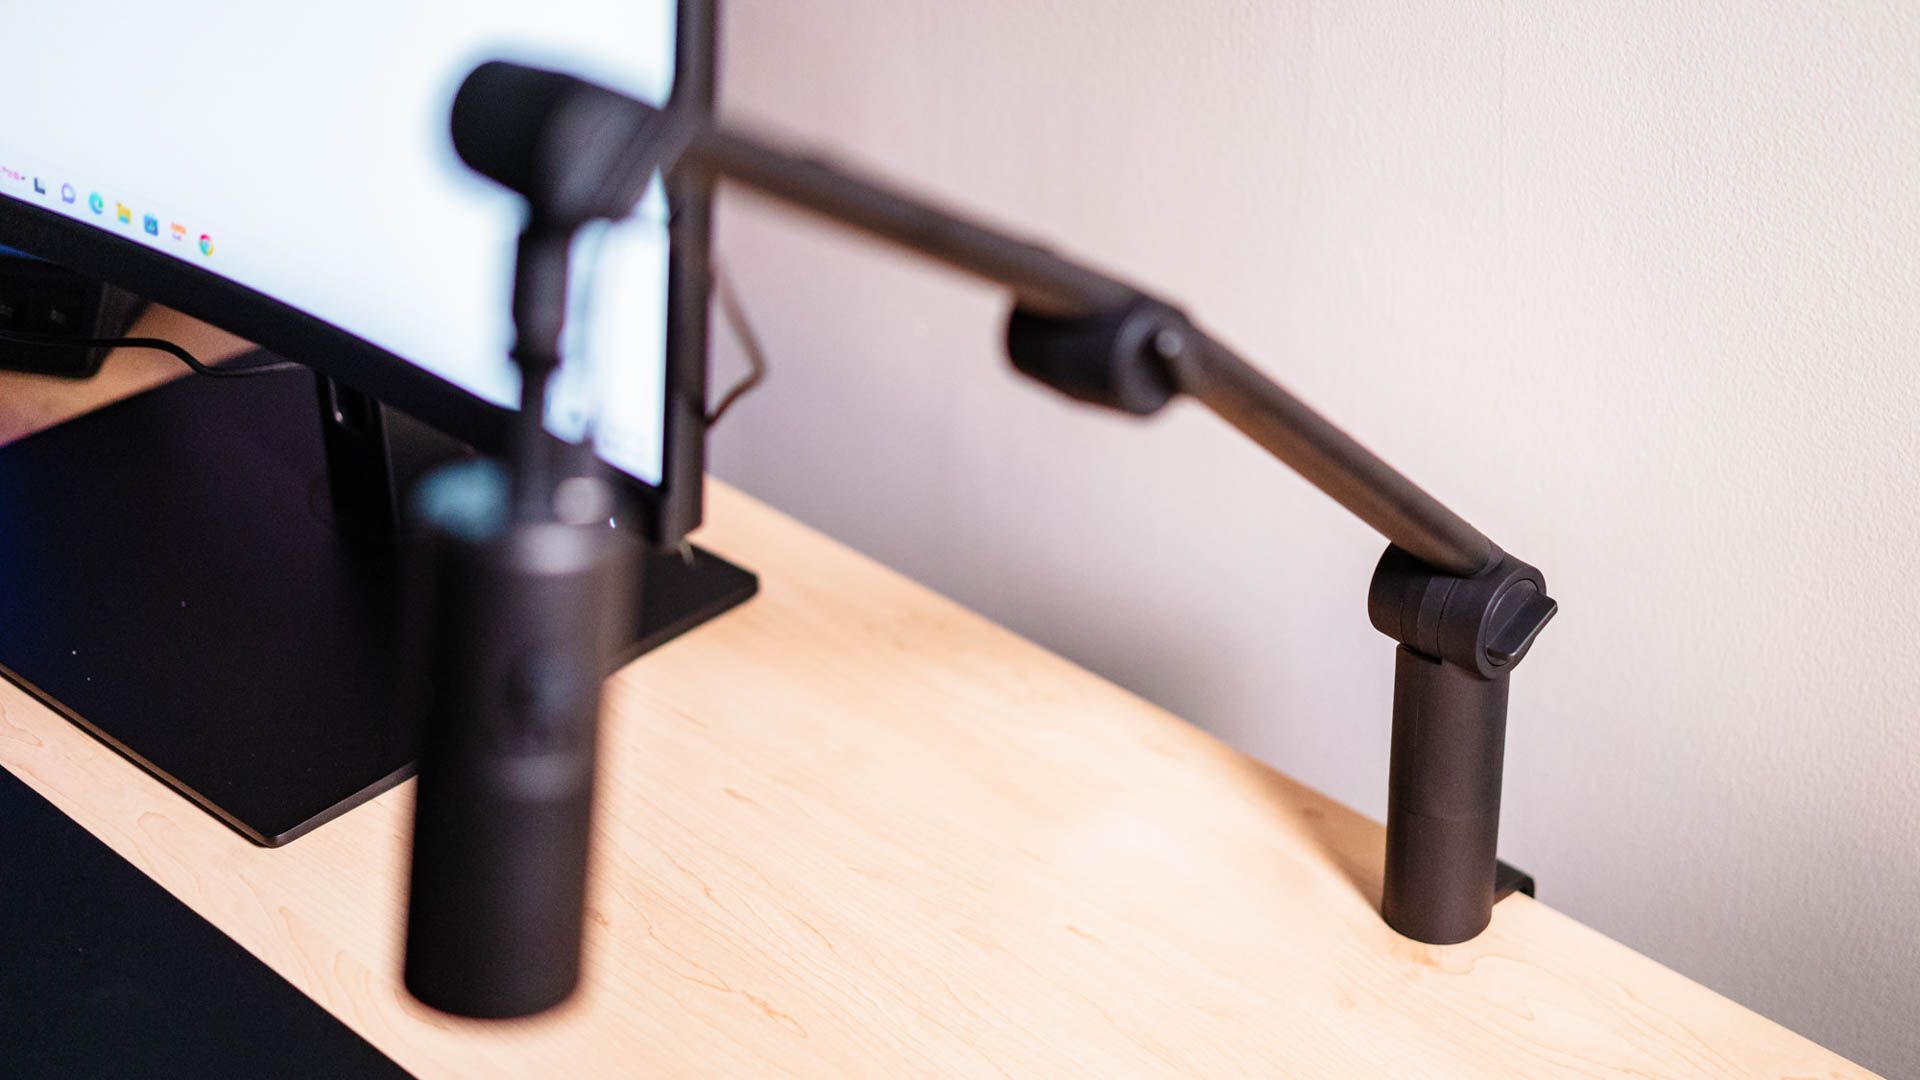 NZXT Capsule Mini Boom Arm clamp attached to a desk